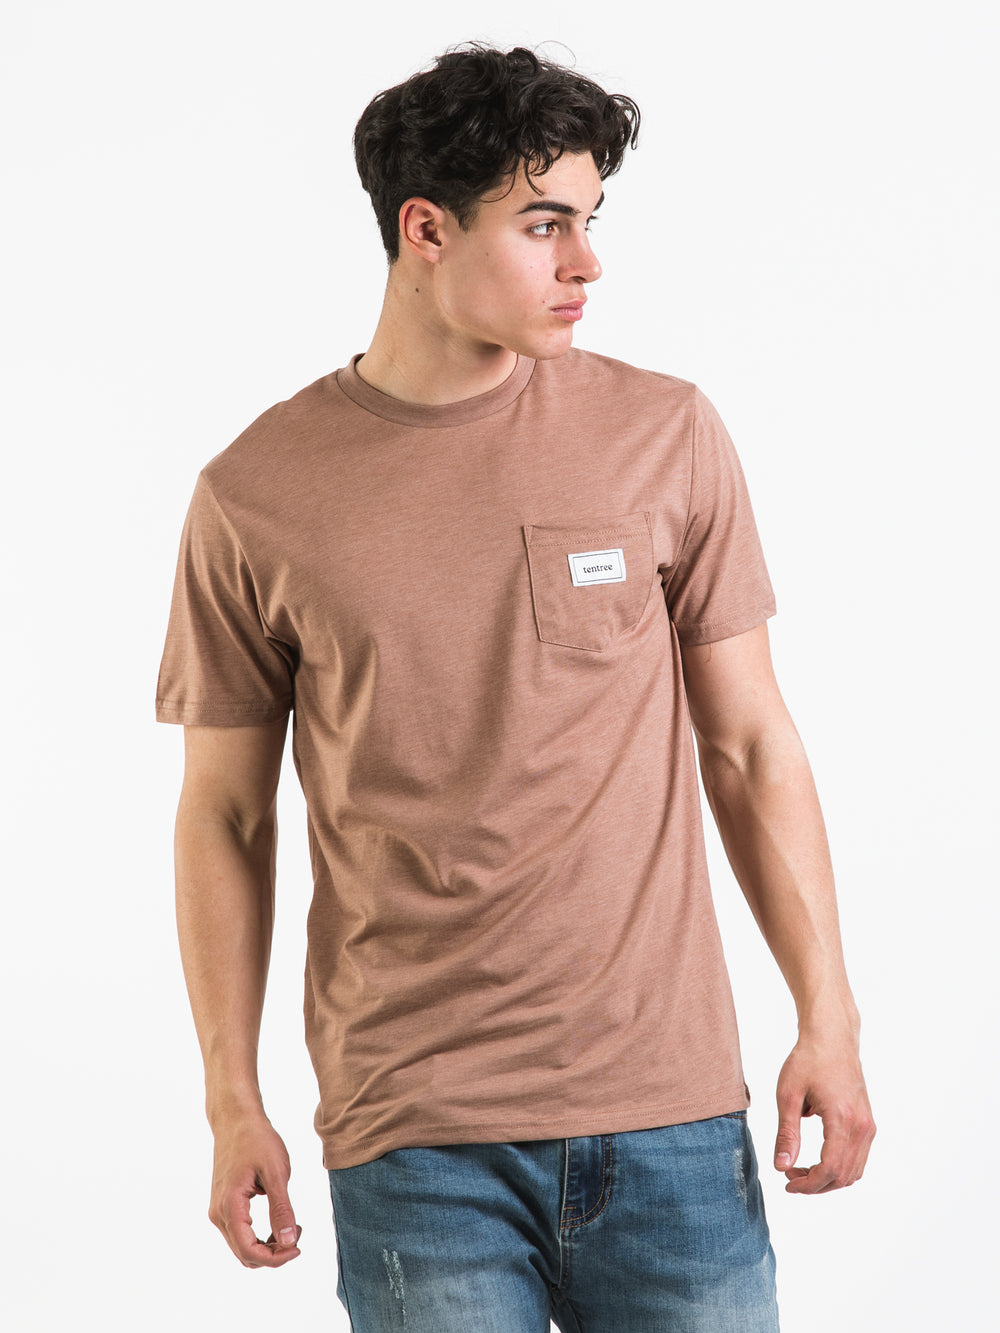 TENTREE TEN TREE WOVEN PATCH POCKET T-SHIRT - CLEARANCE